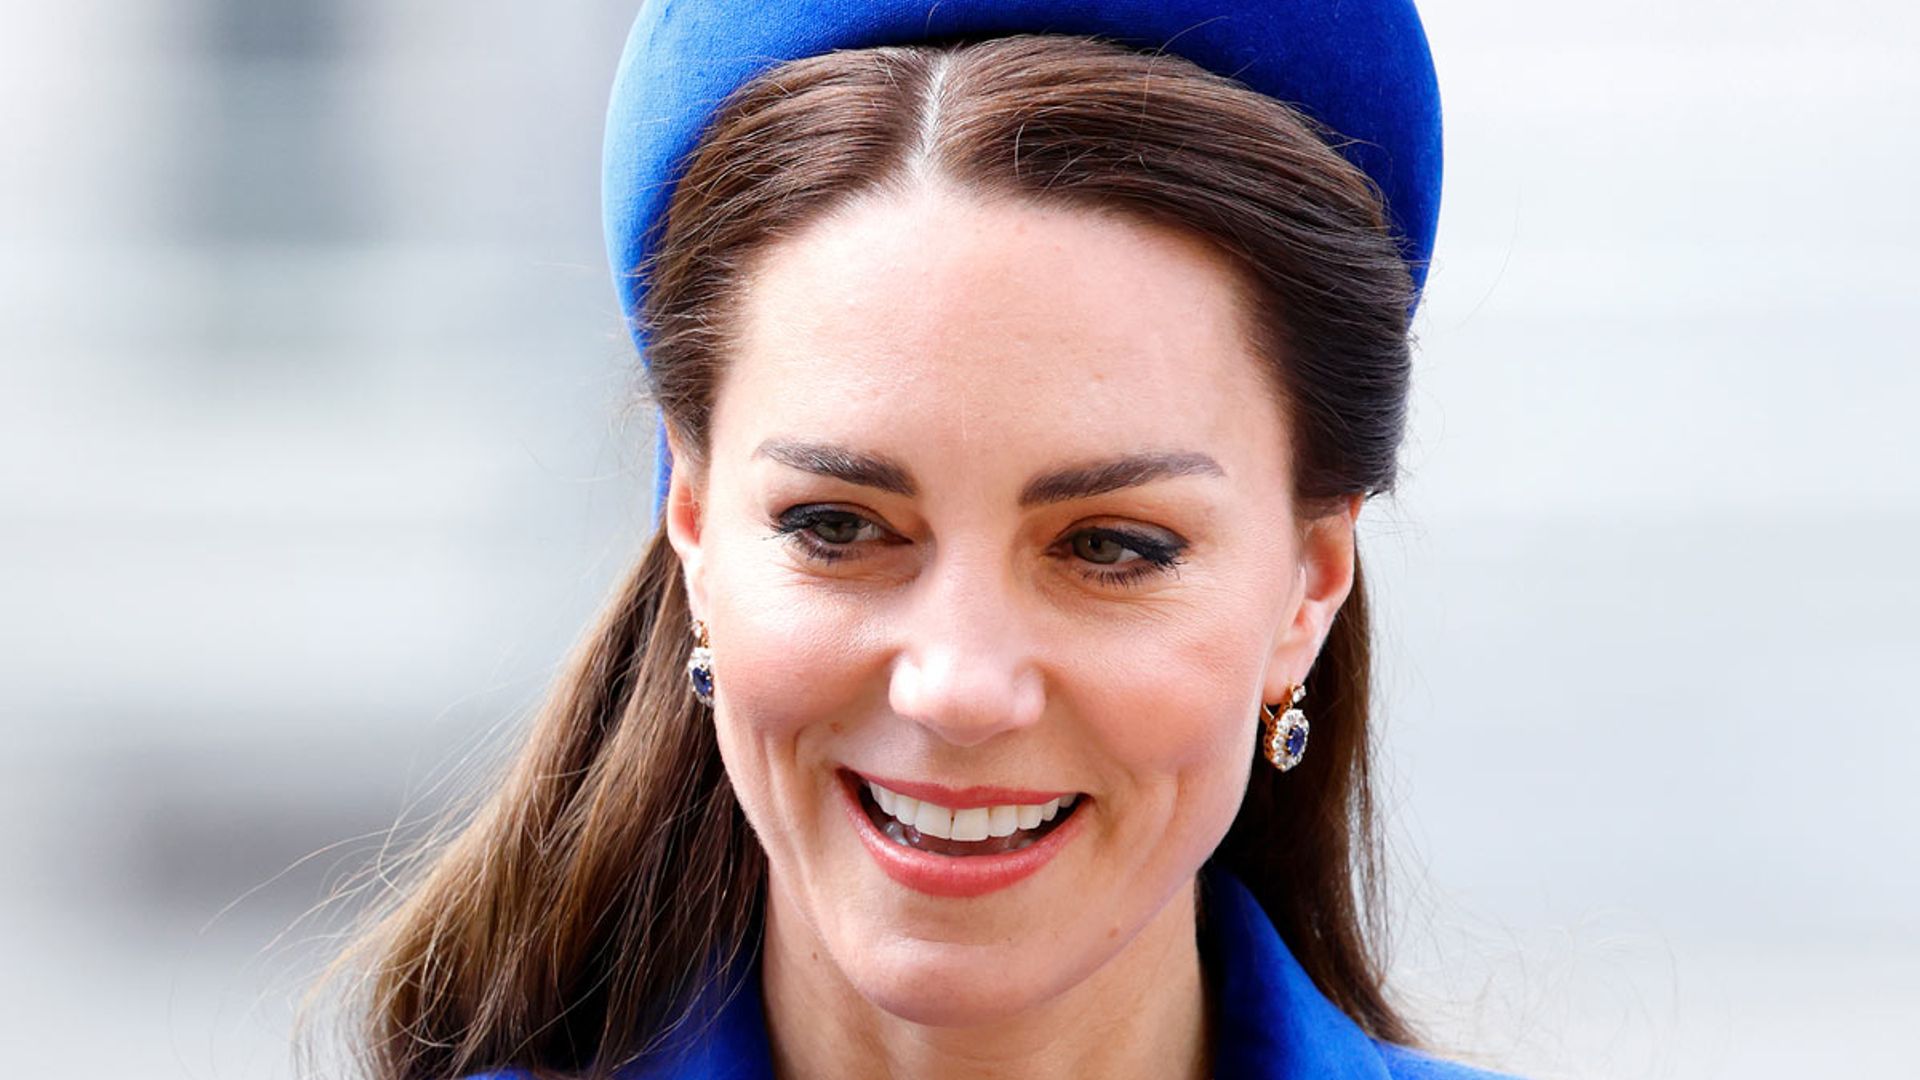 Kate Middleton pays tribute to Ukraine with symbolic outfit choice | HELLO!